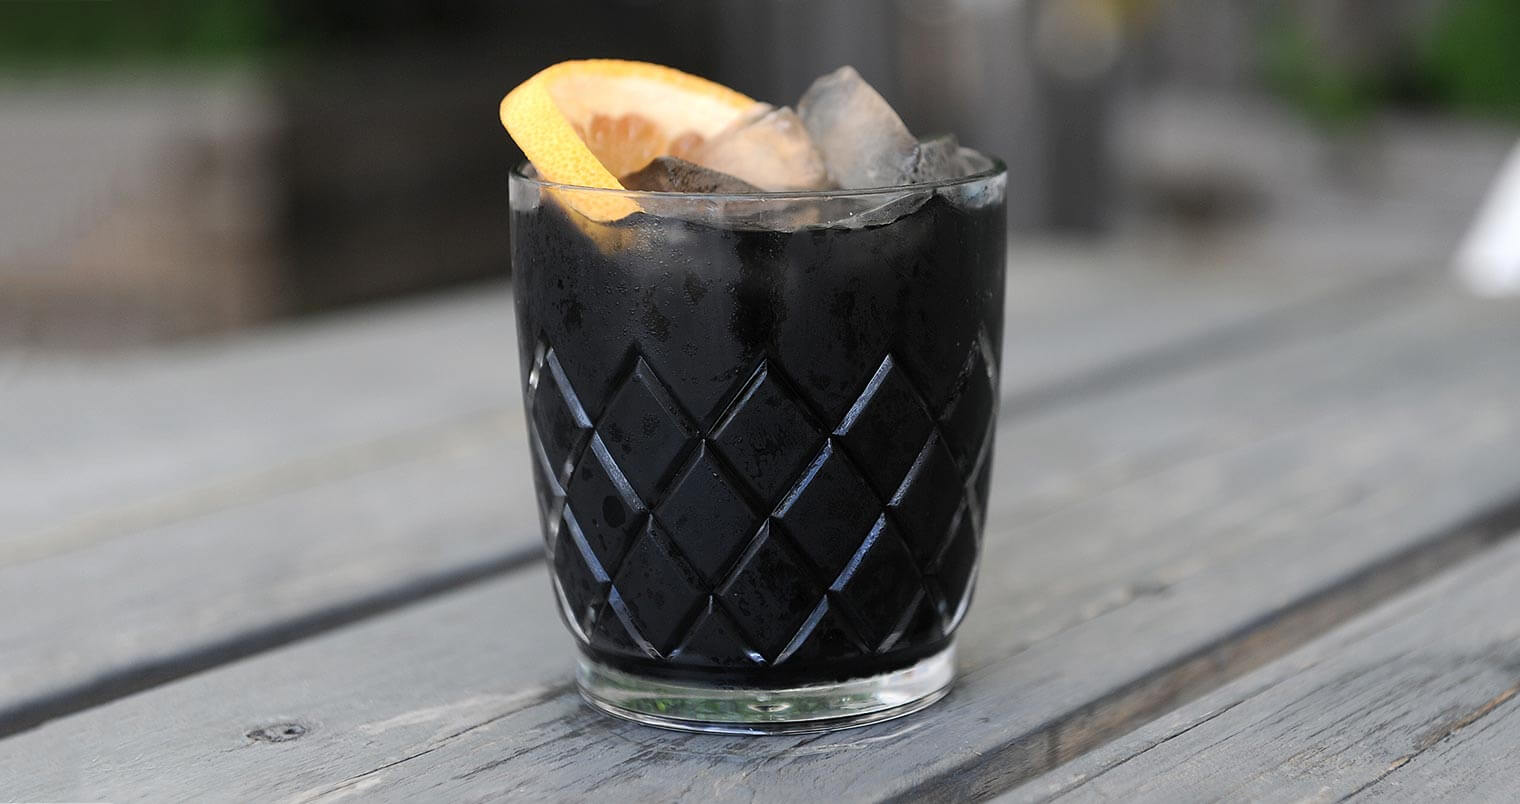 The Dark Side cocktail, featured image